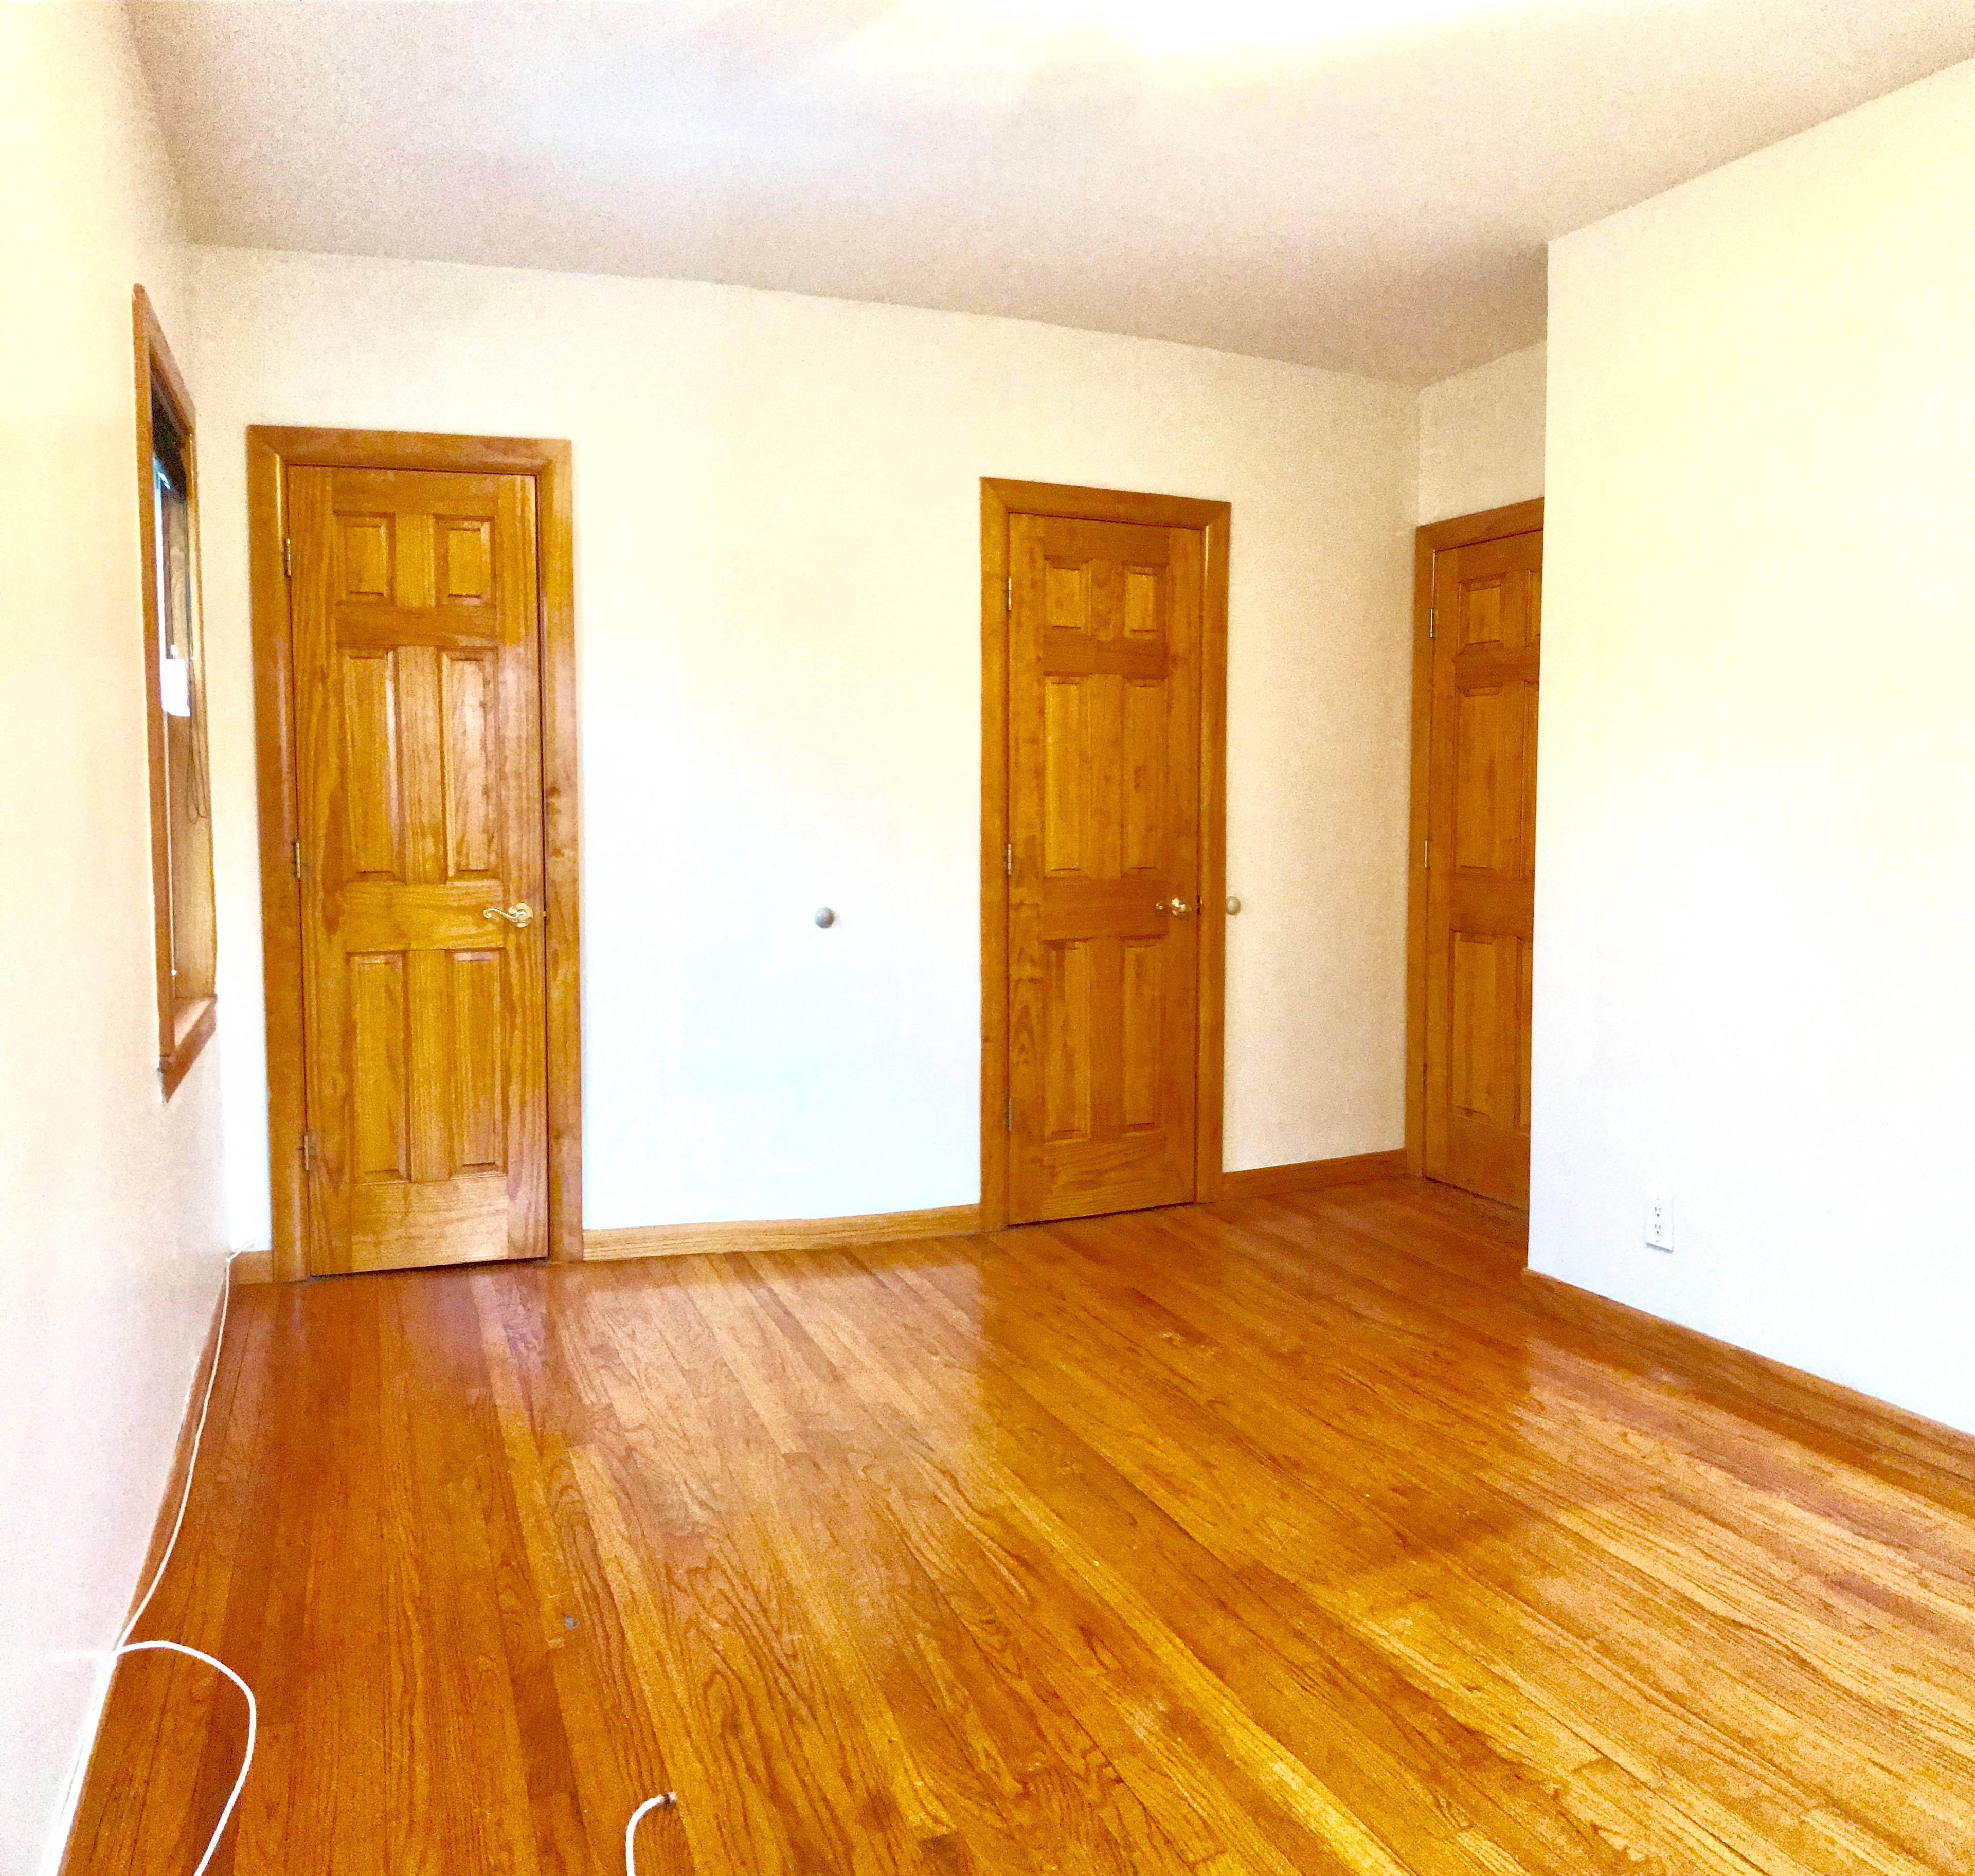 800 Square Foot One Bedroom Rental Apartment In Forest Hills / Rego Park Very Close To 67th Ave Train Stop